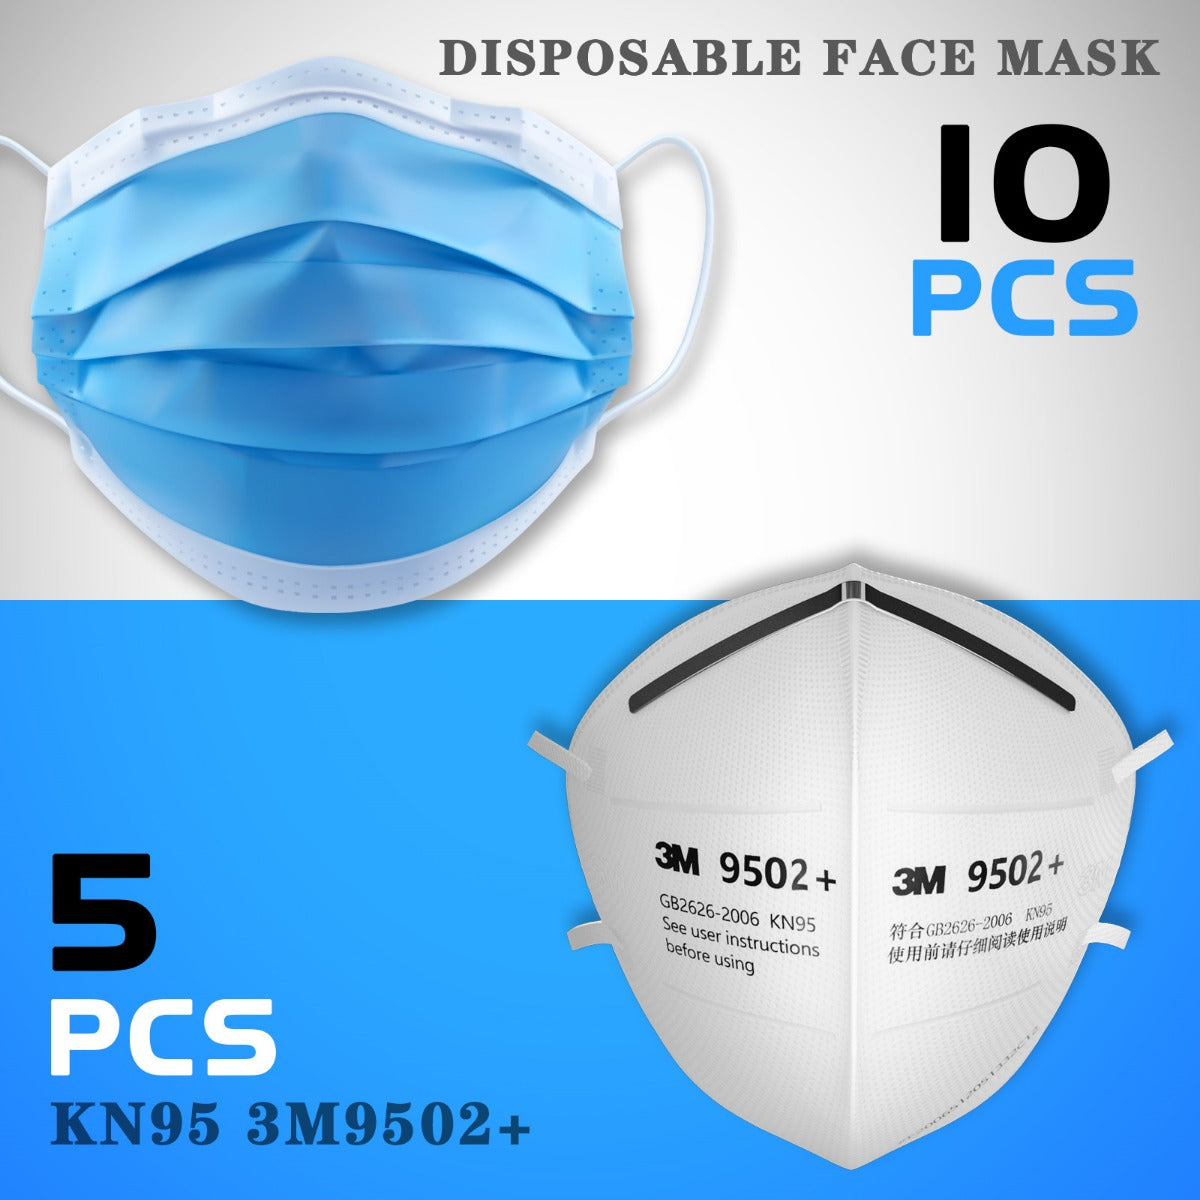 10 x Disposable Face Masks + 5 x Genuine 3M Masks - Free Delivery!